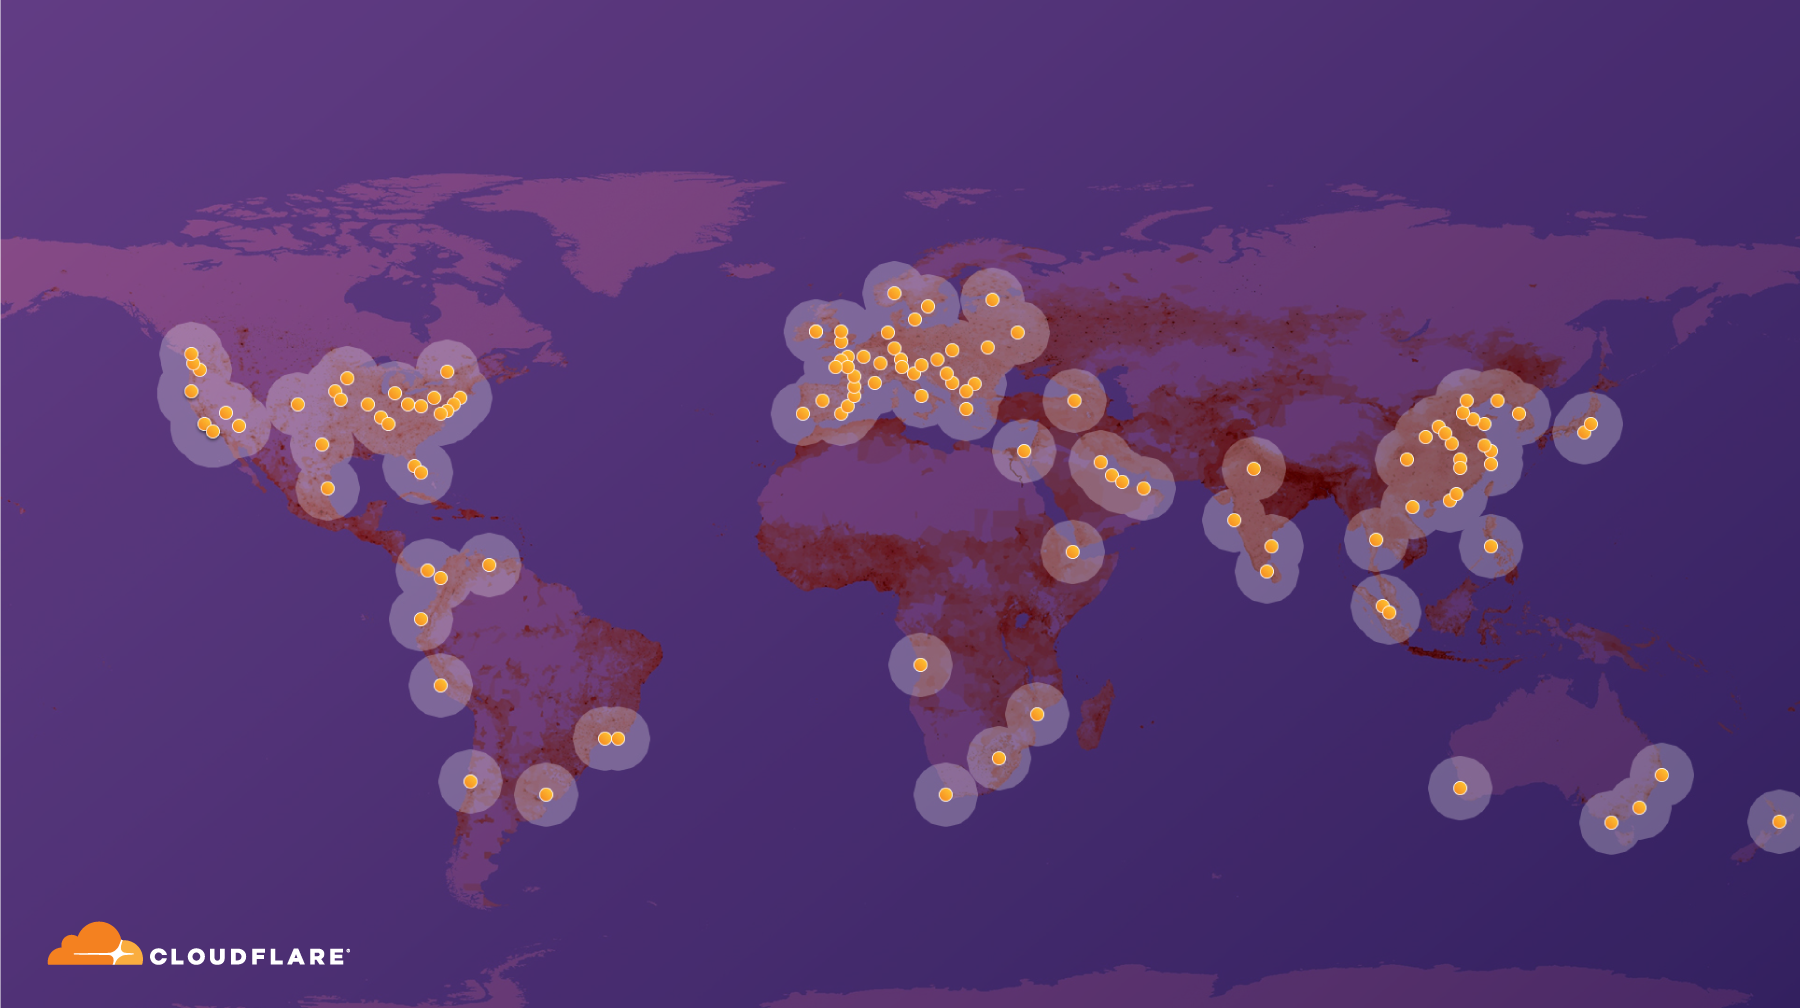 Cloudflare_and_world-population-map